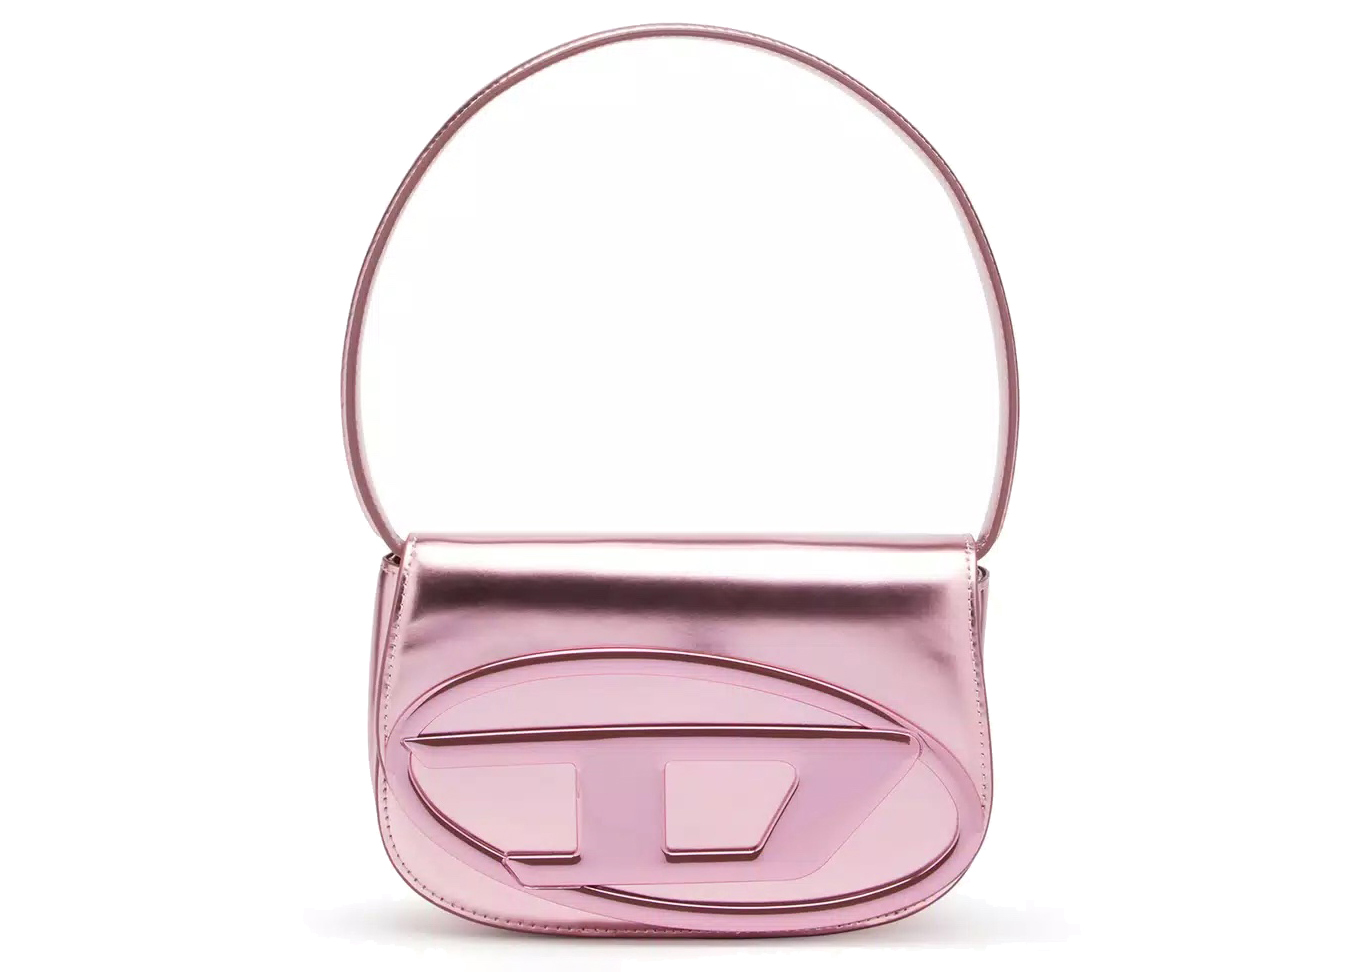 Diesel 1DR Shoulder Bag Mirrored Leather Pink in Mirrored Leather